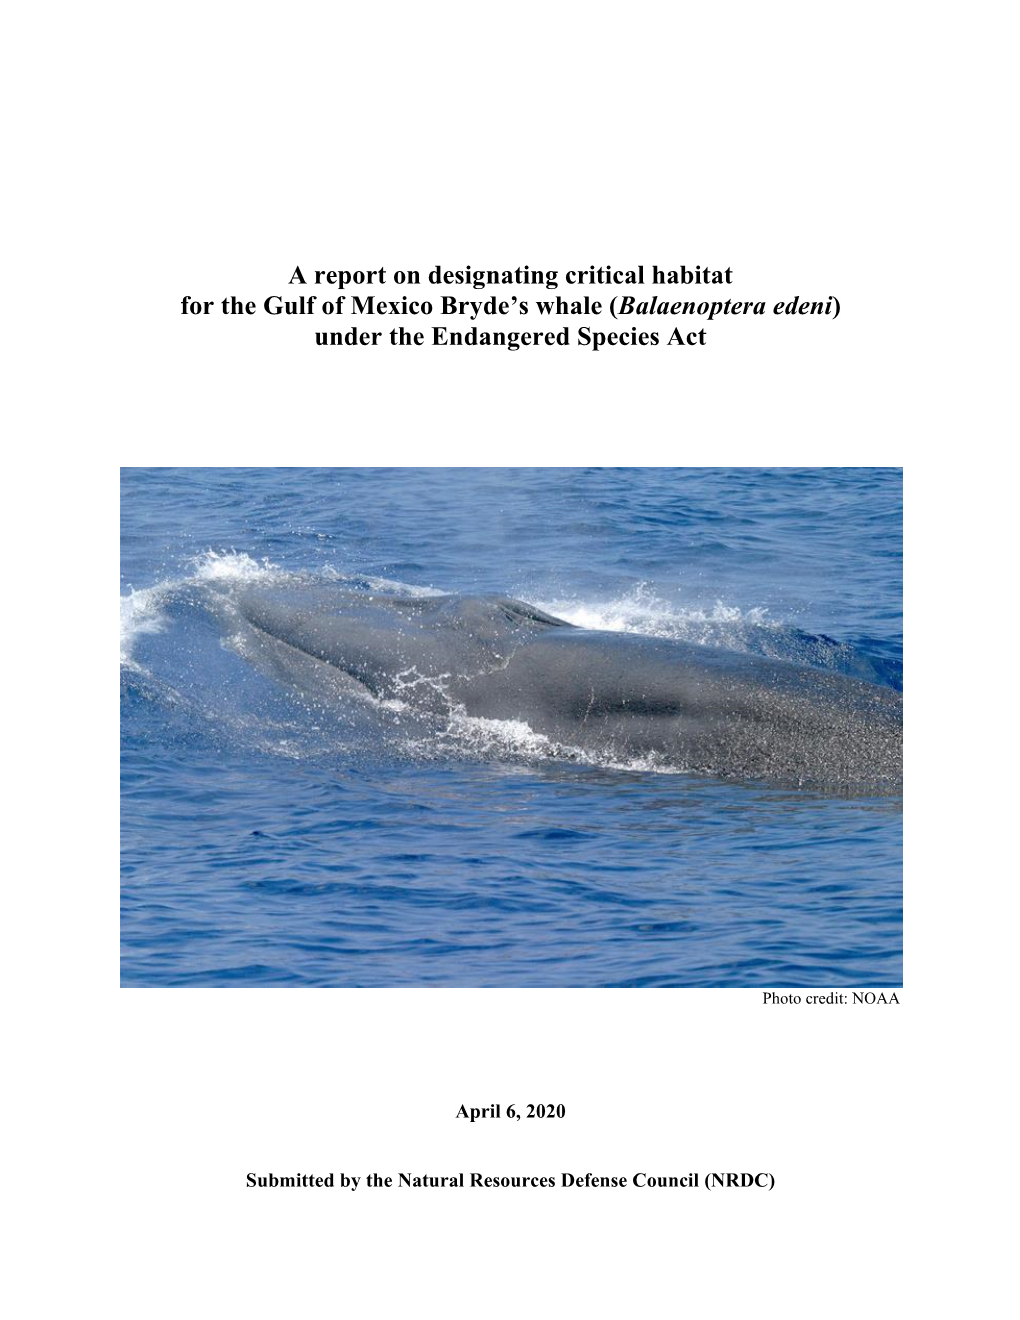 A Report on Designating Critical Habitat for the Gulf of Mexico Bryde's Whale